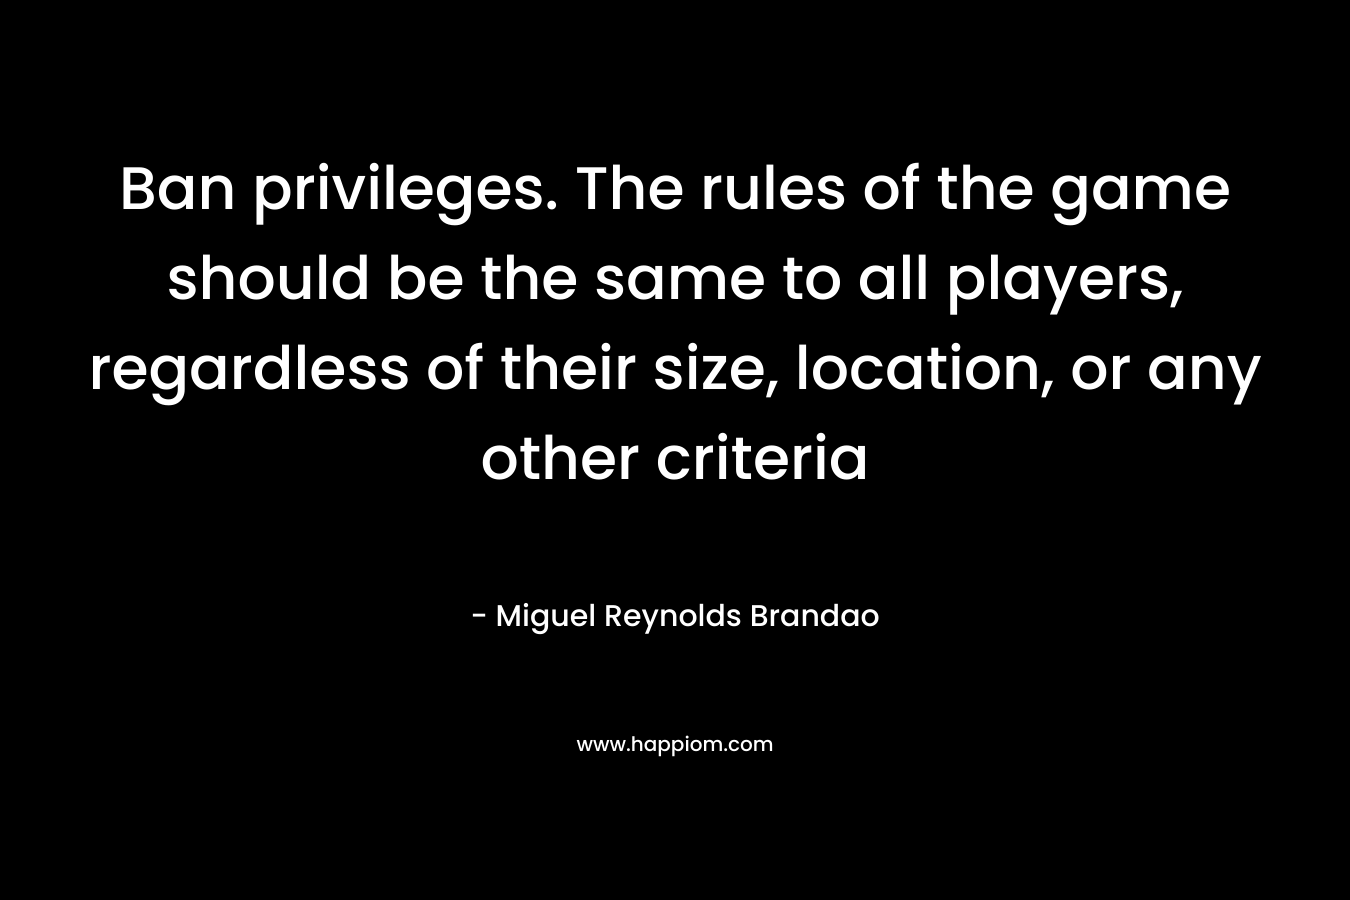 Ban privileges. The rules of the game should be the same to all players, regardless of their size, location, or any other criteria